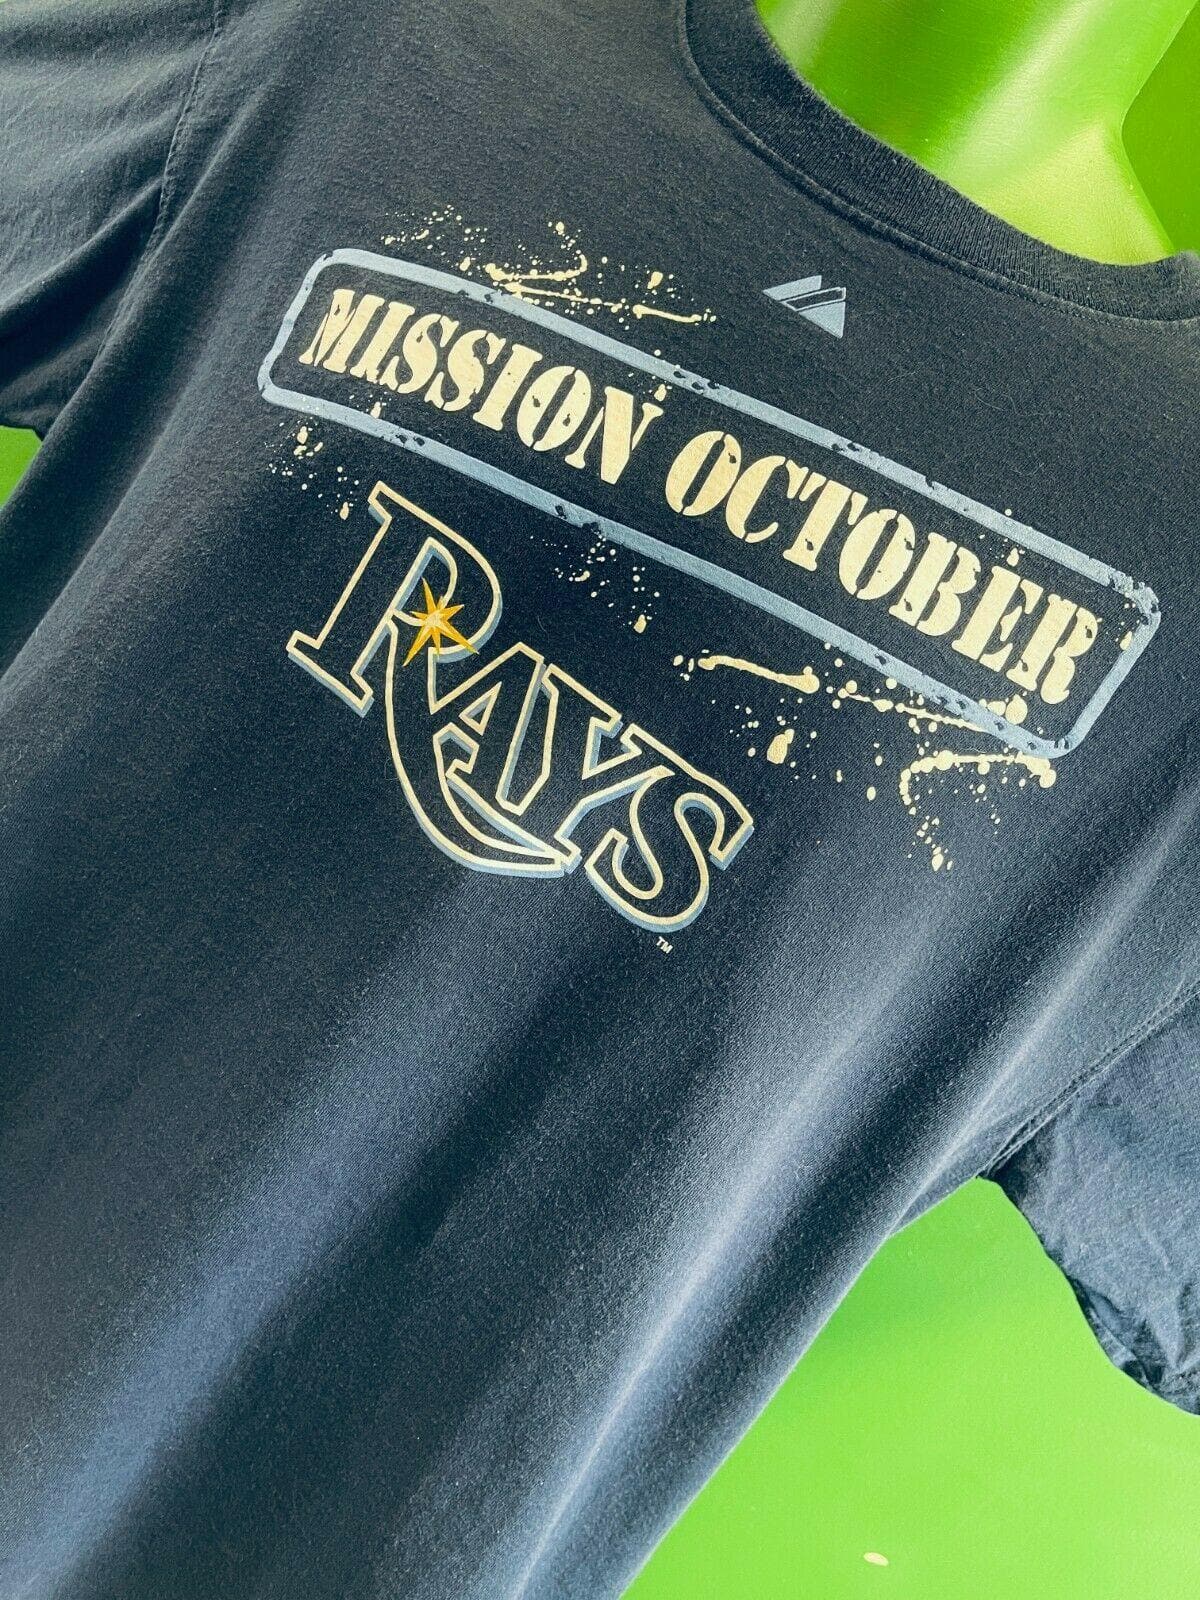 MLB Tampa Bay Rays Majestic "Mission October" T-Shirt Men's Large